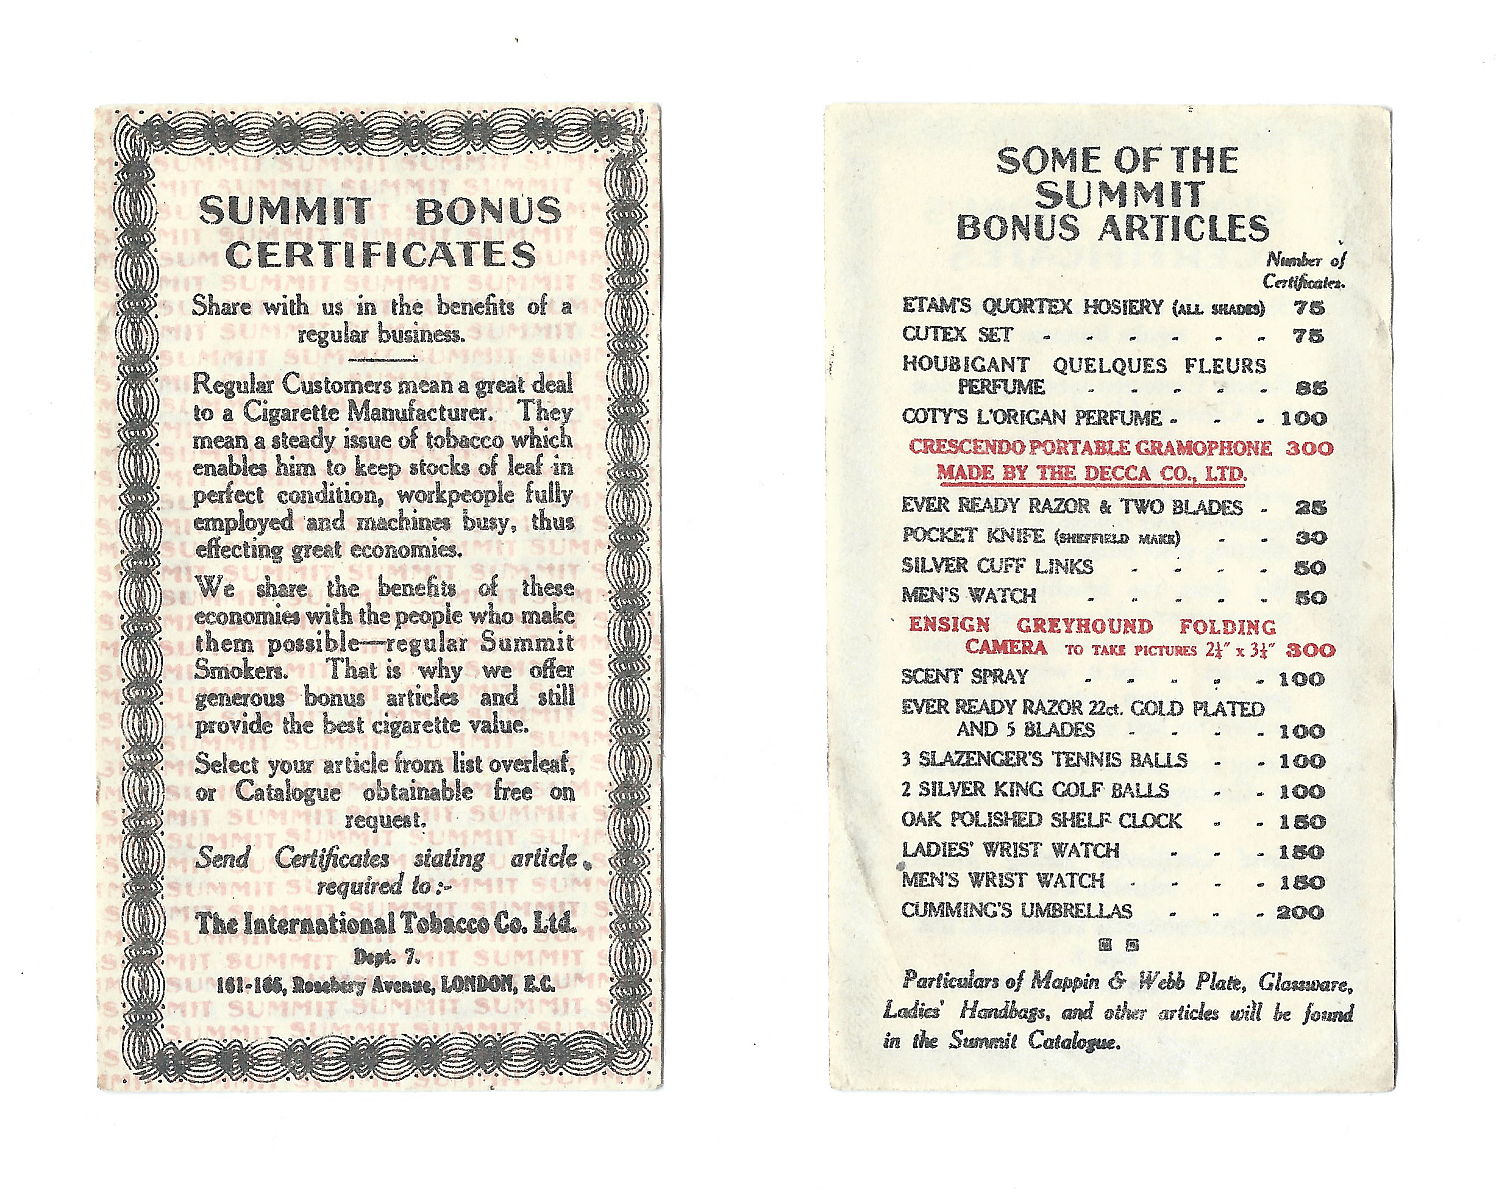 Image of the Summit cigarette coupon or bonus certificate (front and back)